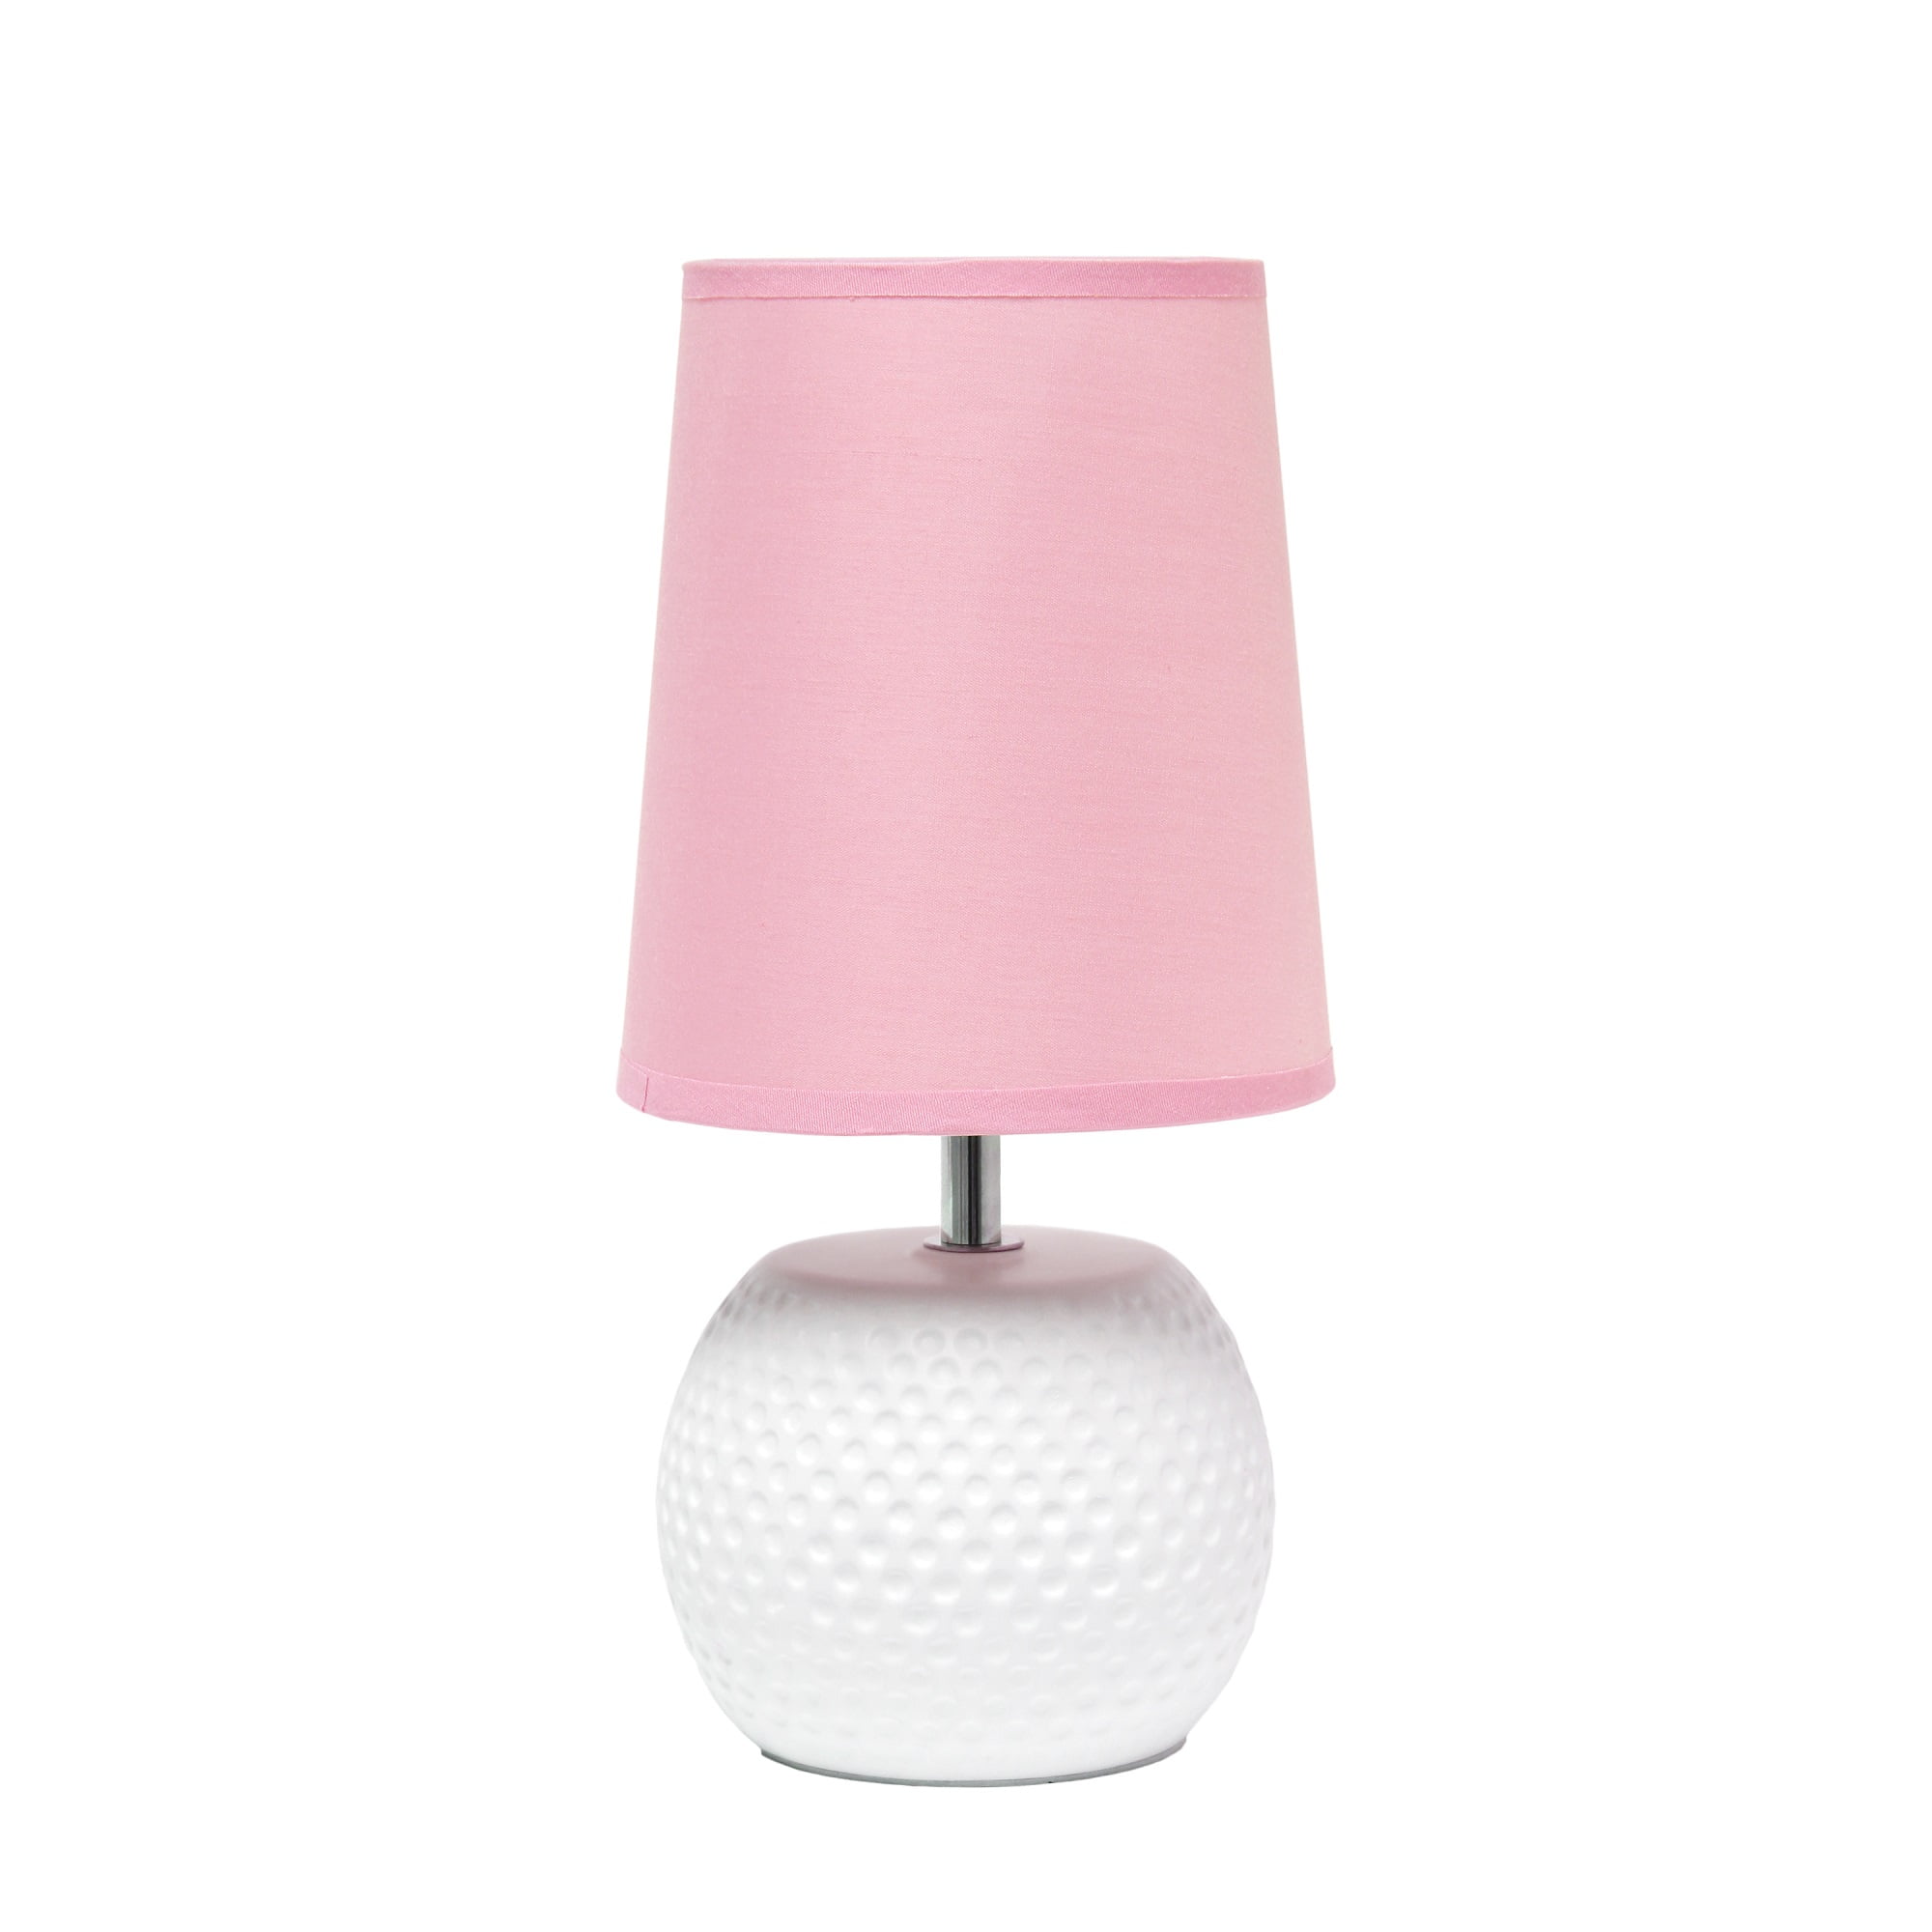 Simple Designs Studded Texture Ceramic Table Lamp, Pink